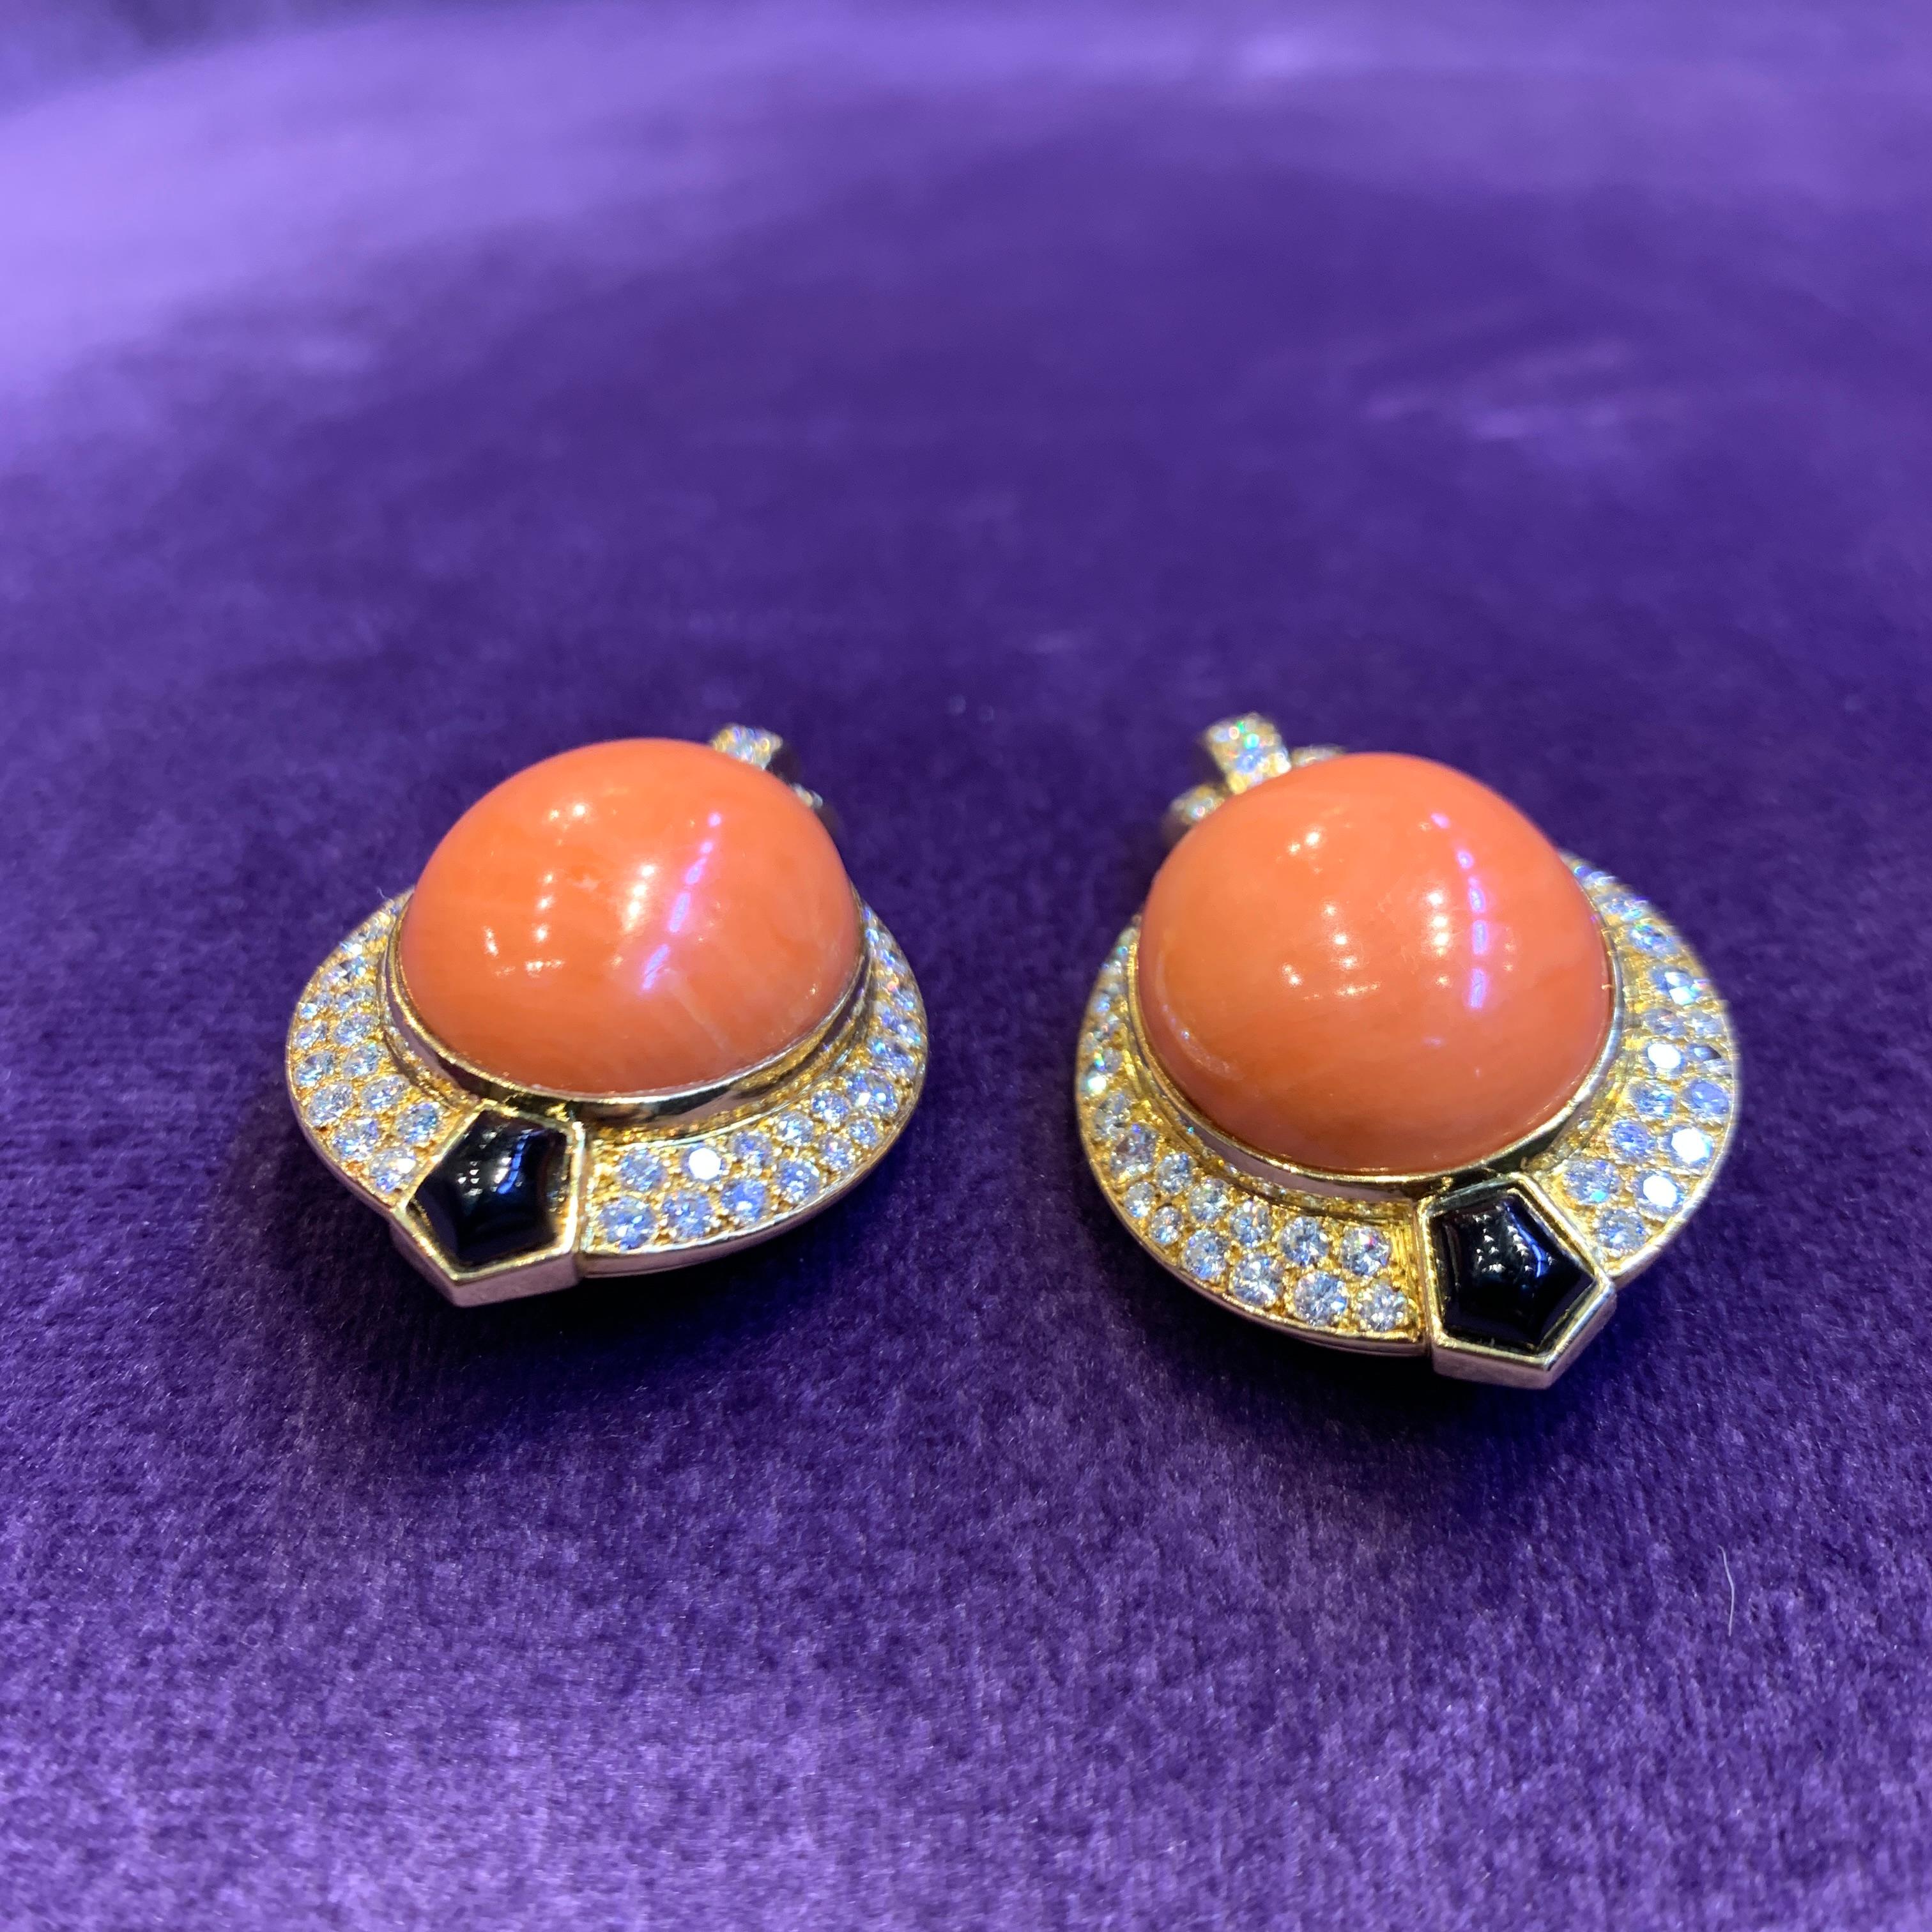 Cartier Egyptian Revival Coral Diamond & Onyx Earrings For Sale 5